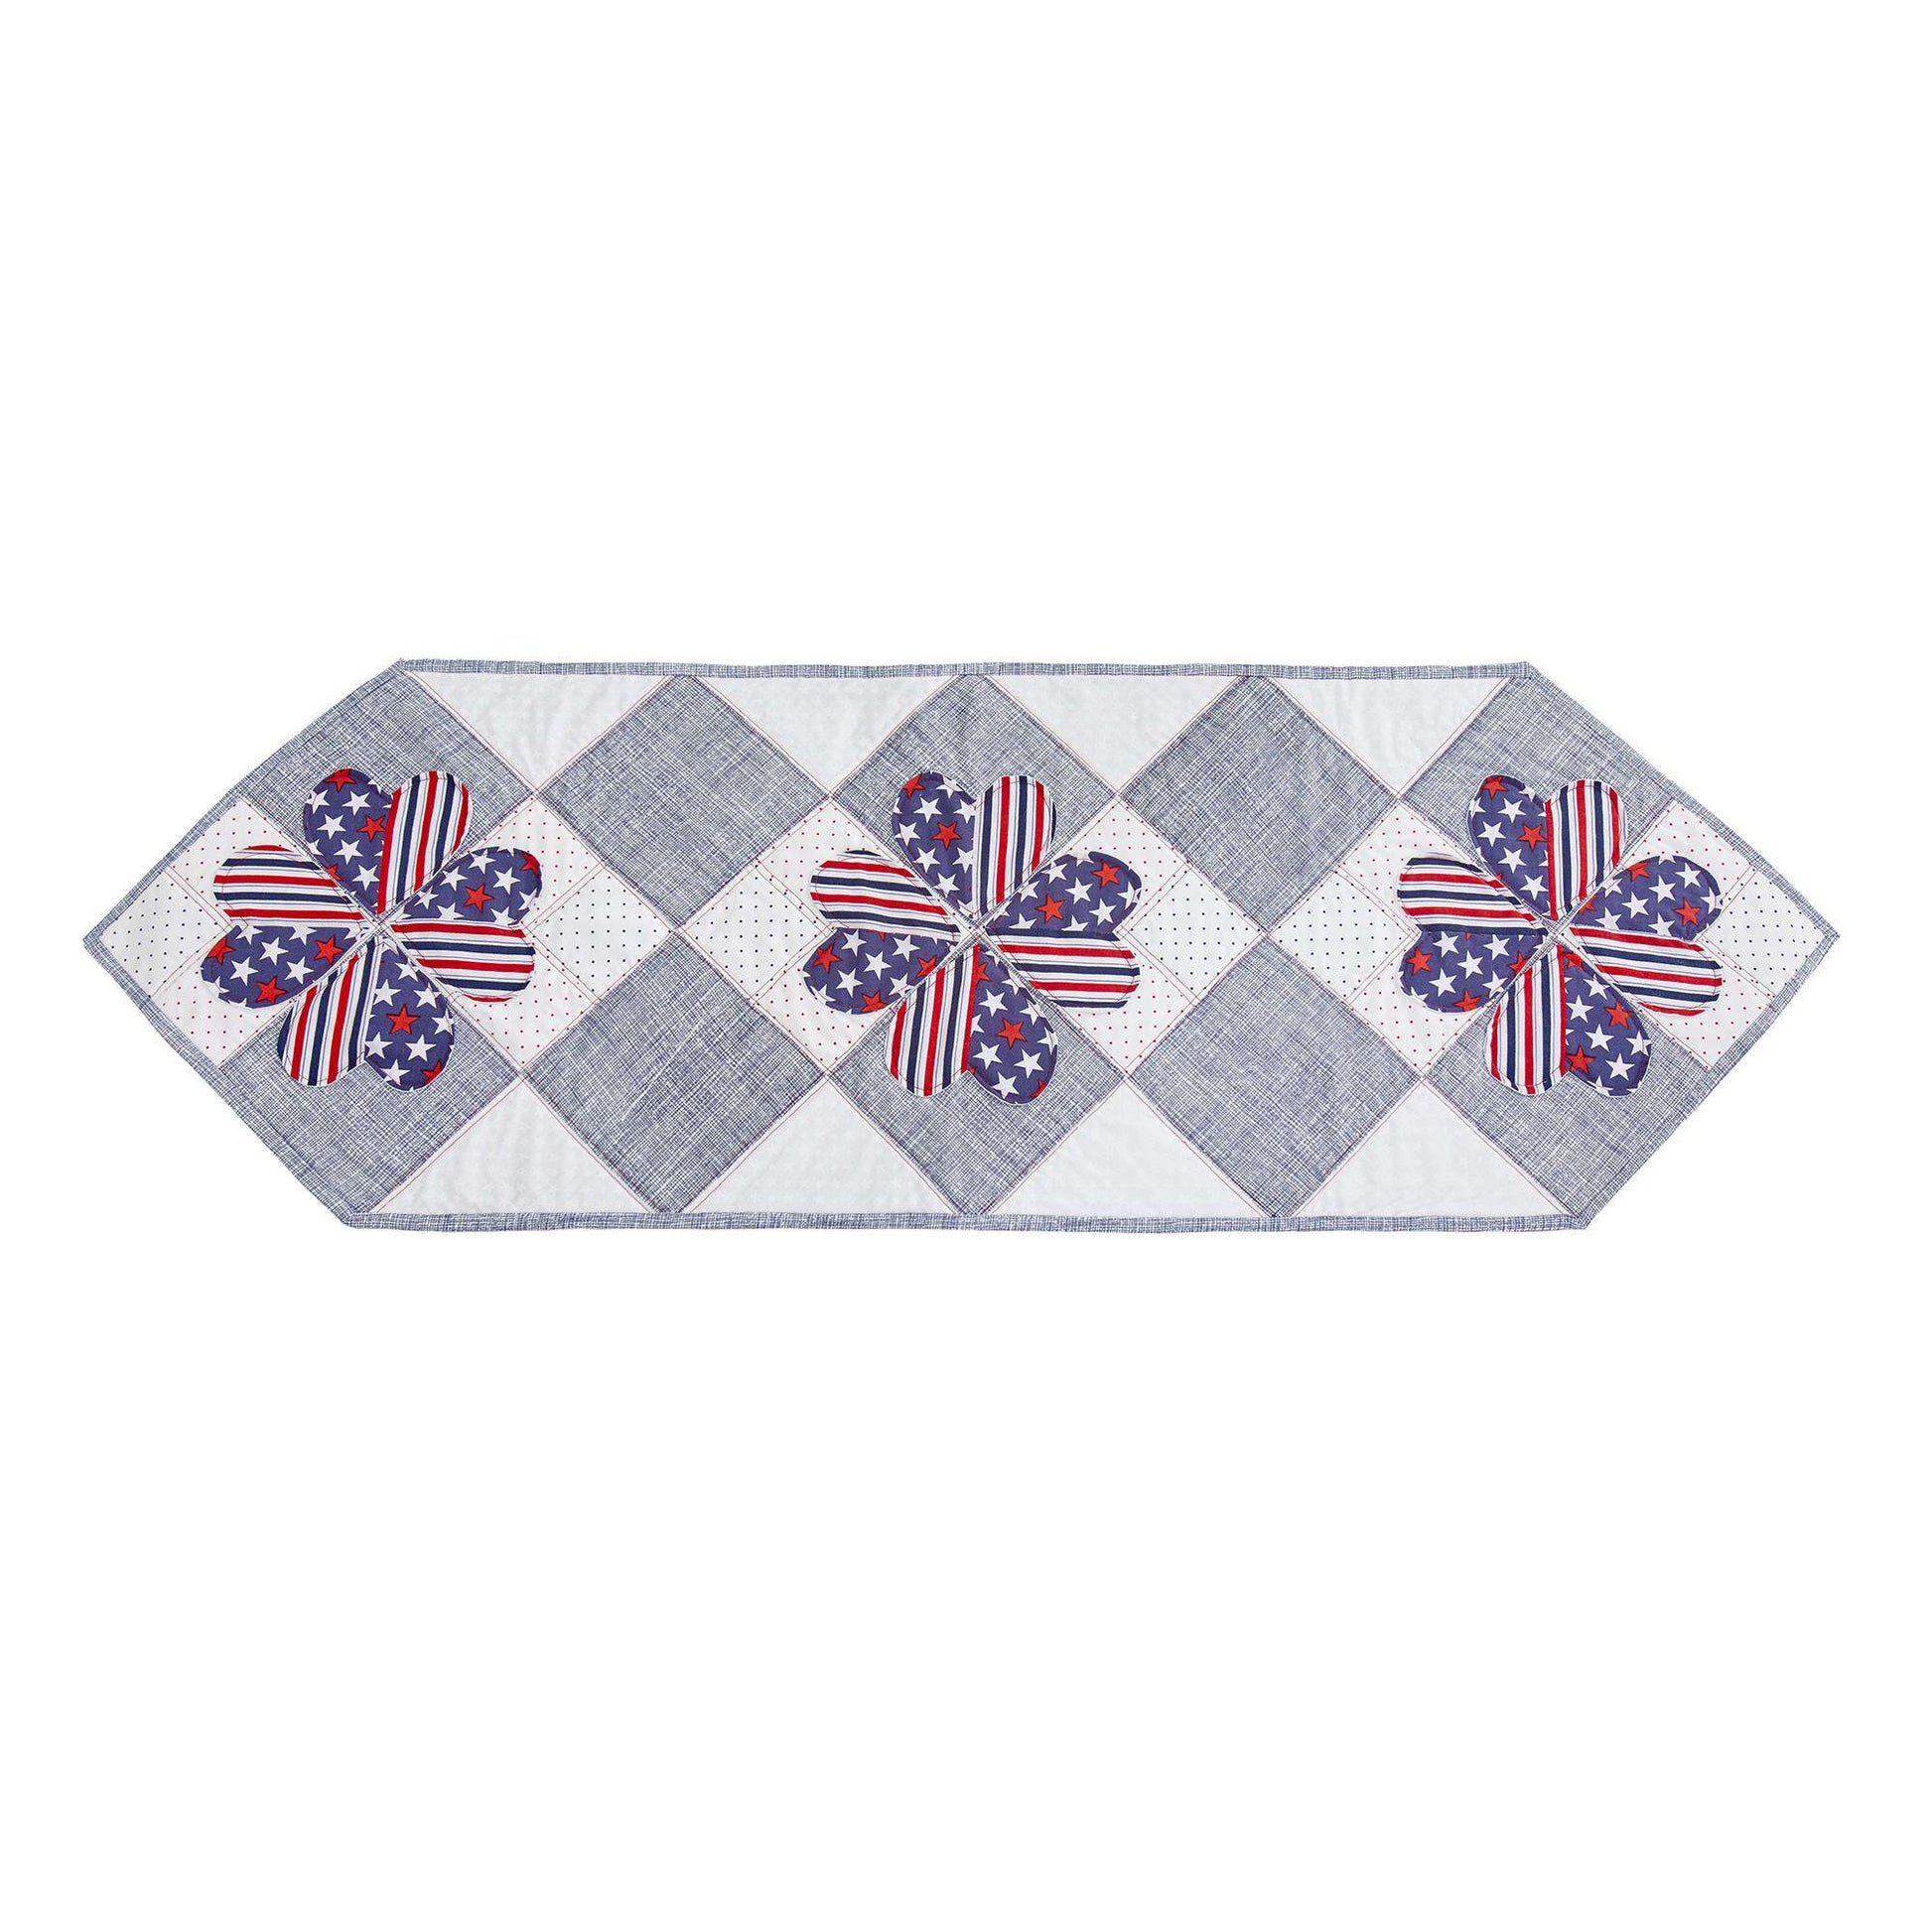 Free Coats & Clark Quilting Patriotic Love Table Runner Pattern